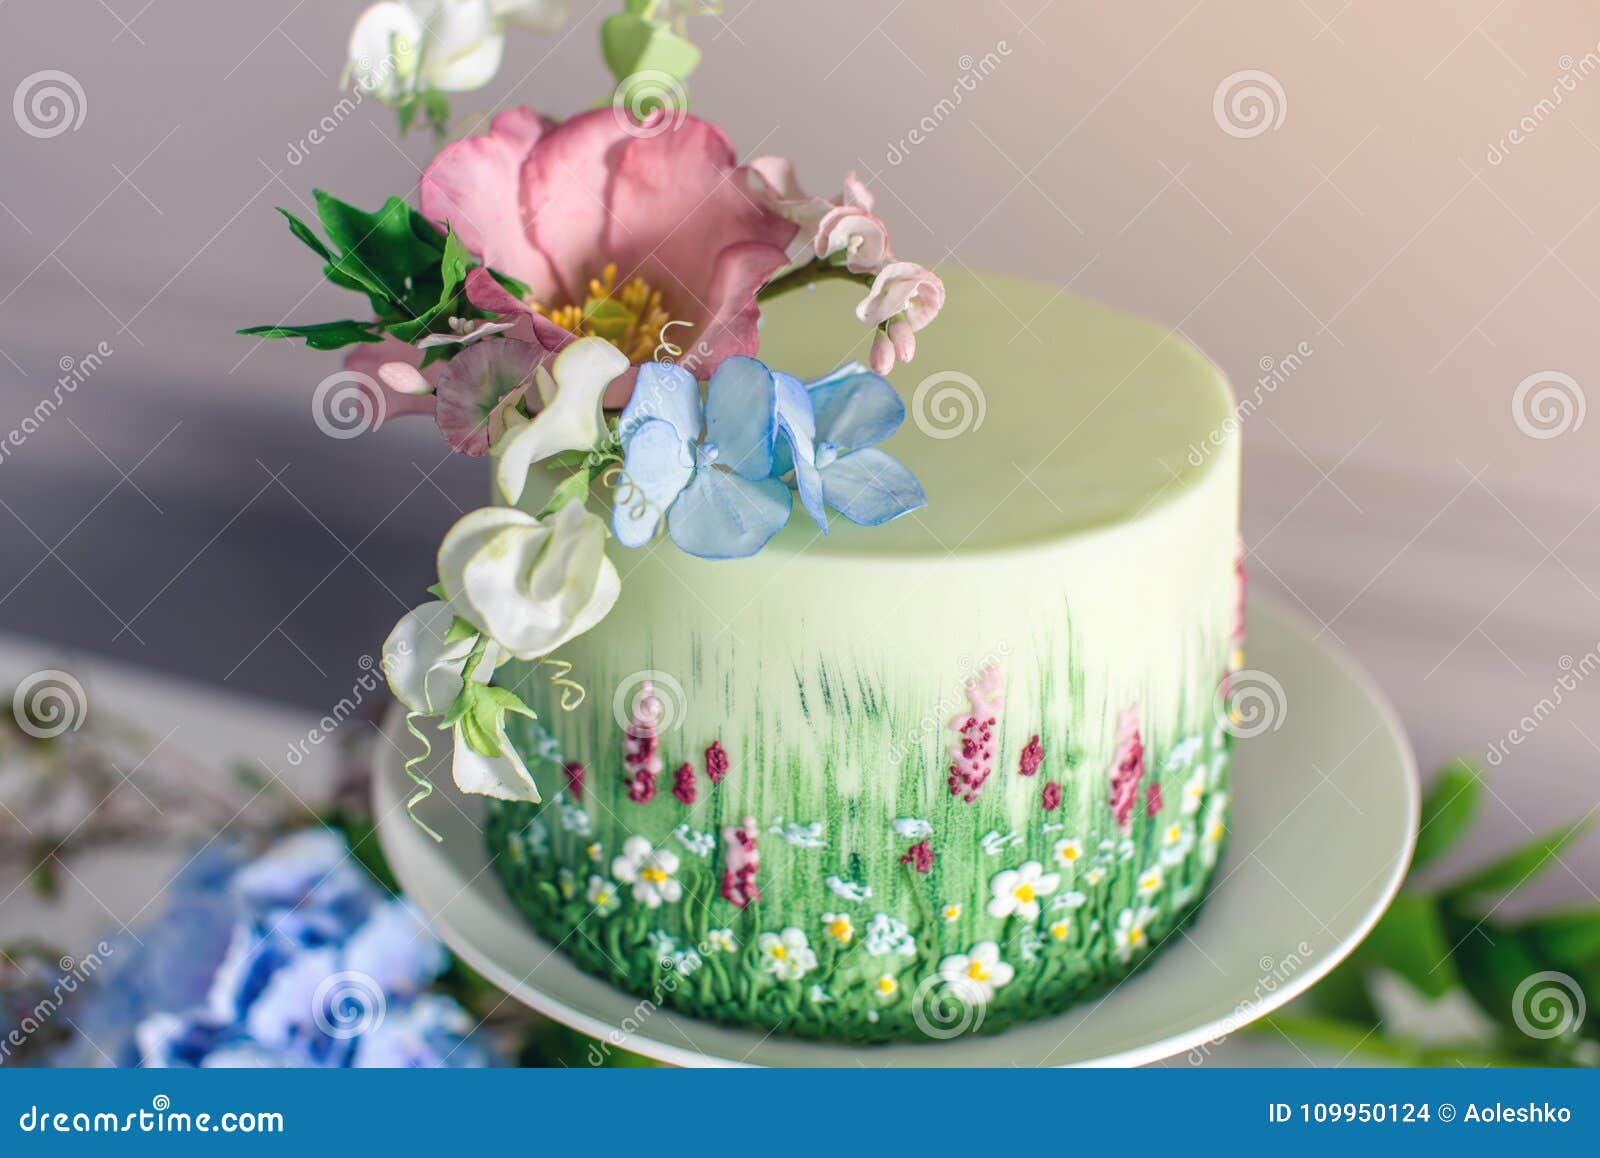 Wedding Spring Cake Decorated with Colorful Flowers and Hydrangeas ...